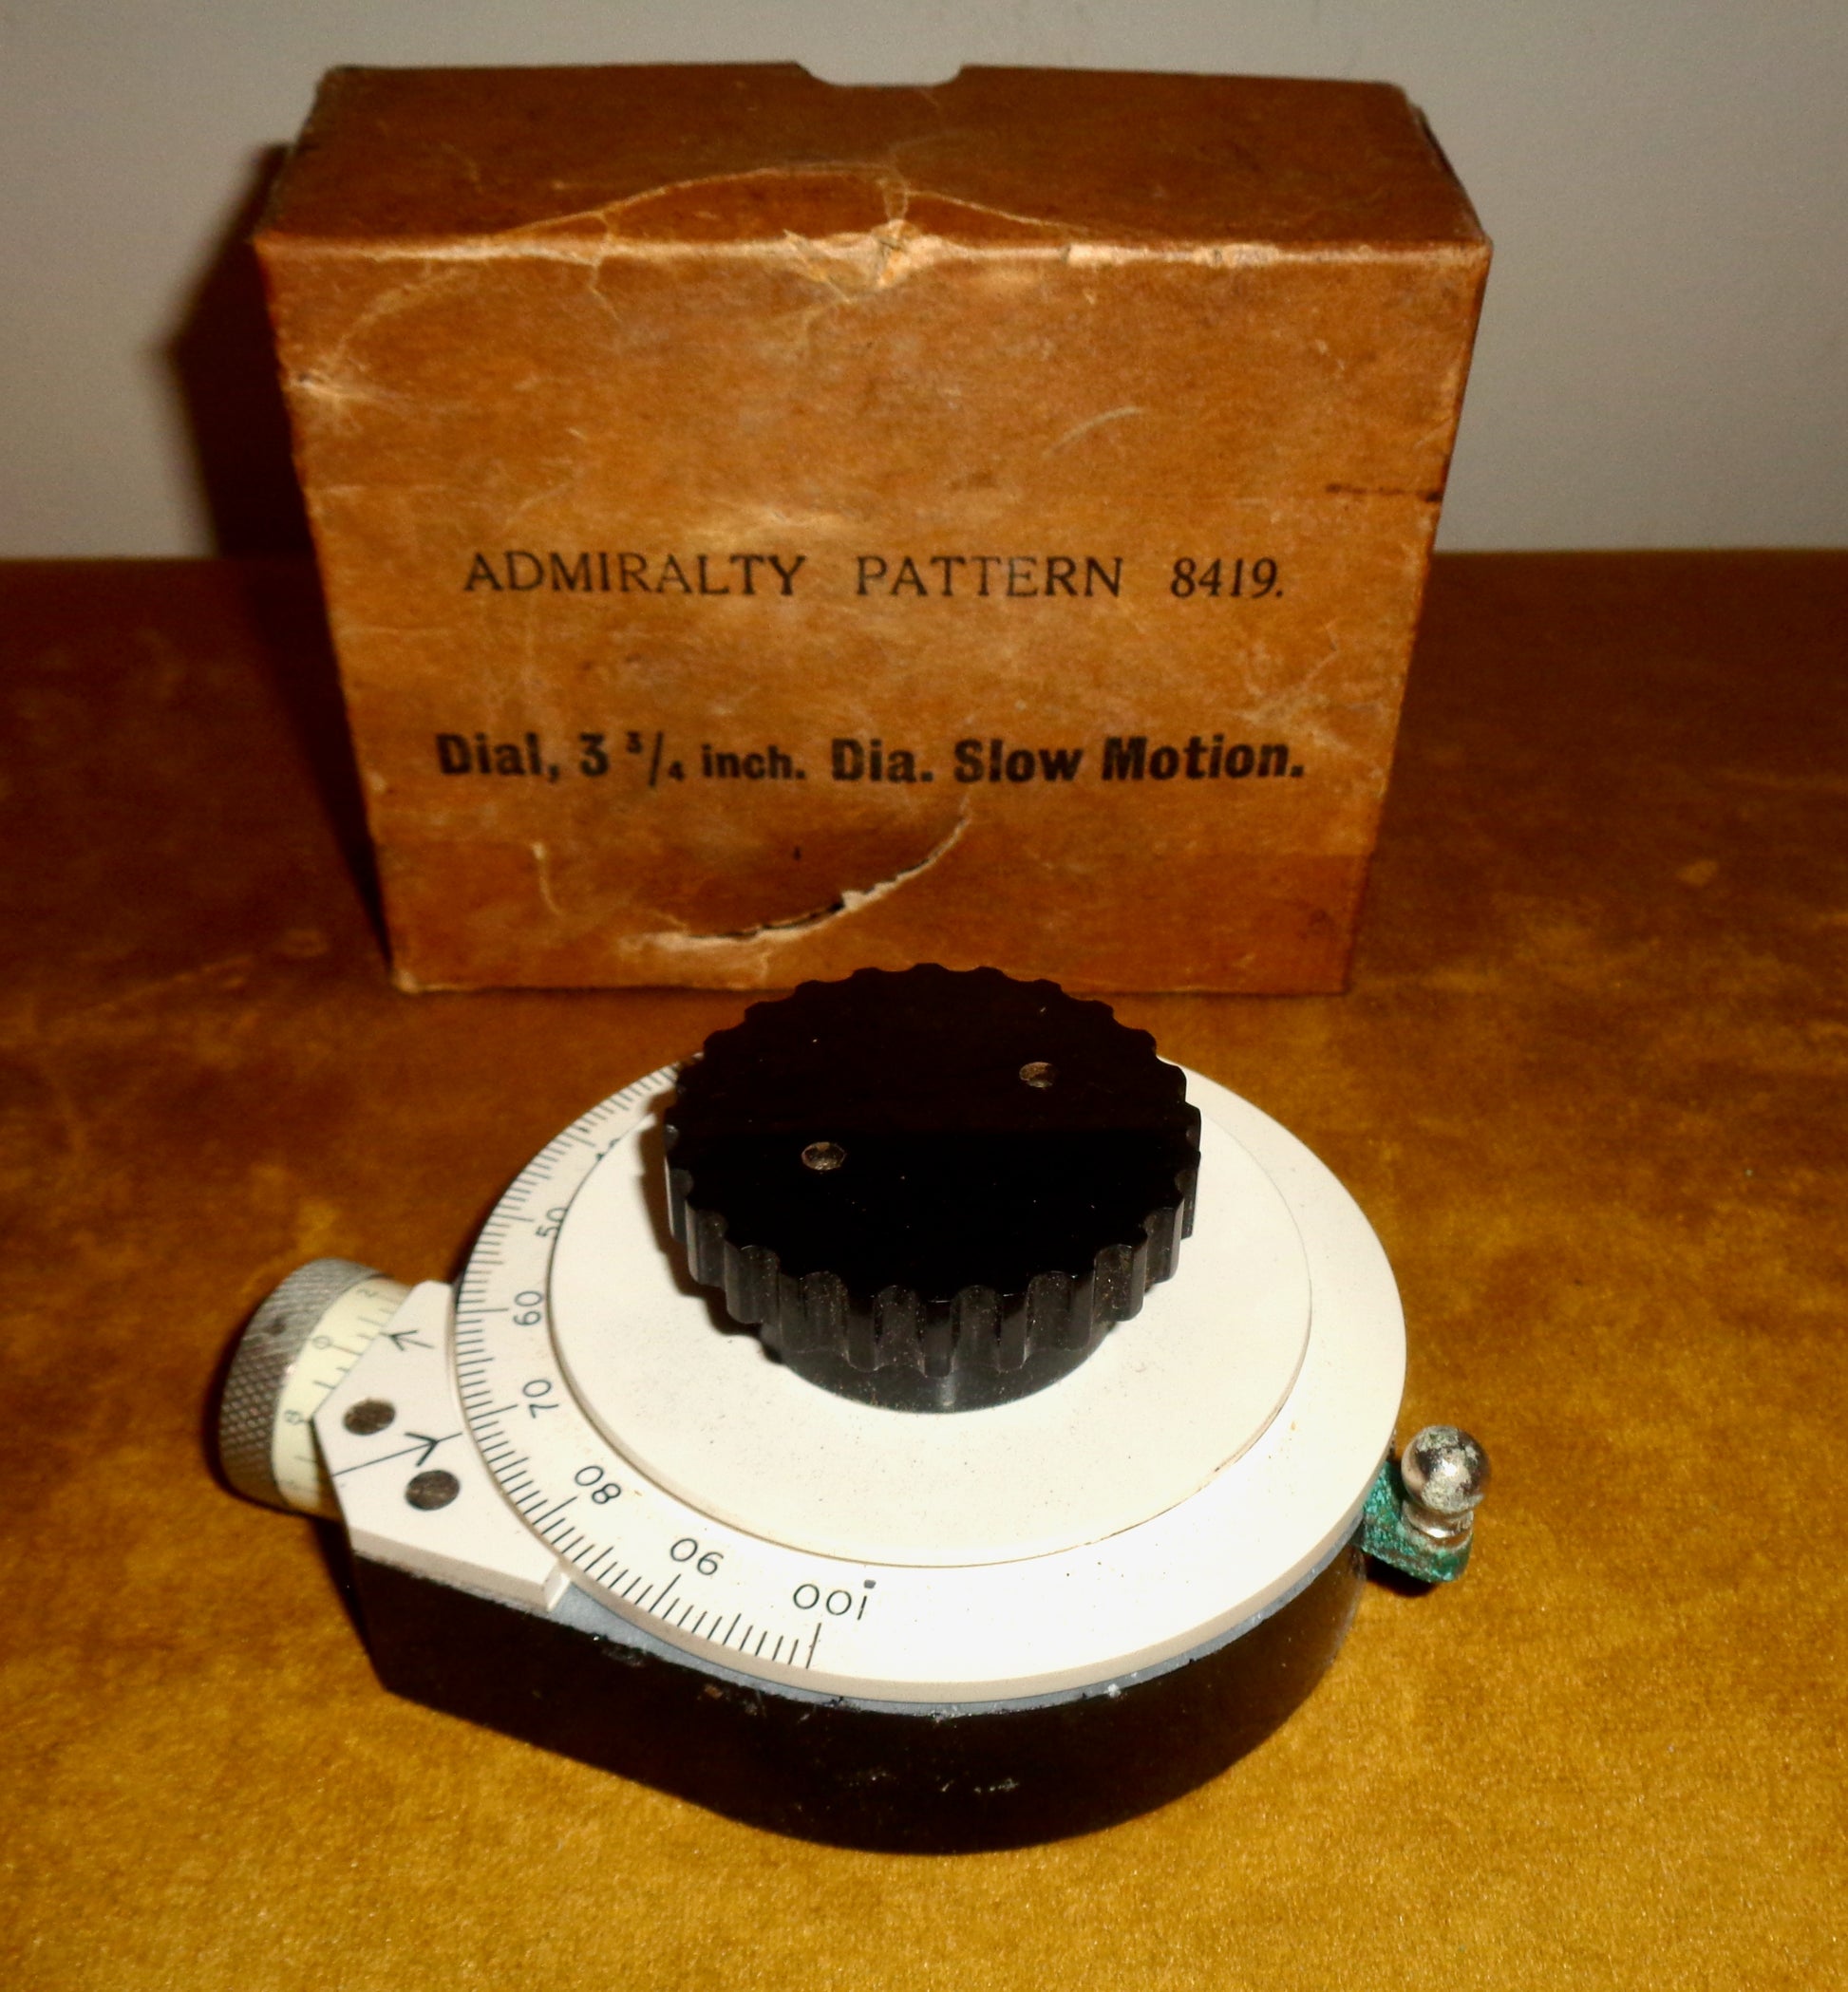 Pre-WW2 Slow Motion Dial Admiralty Pattern 8419 In Its Original Box